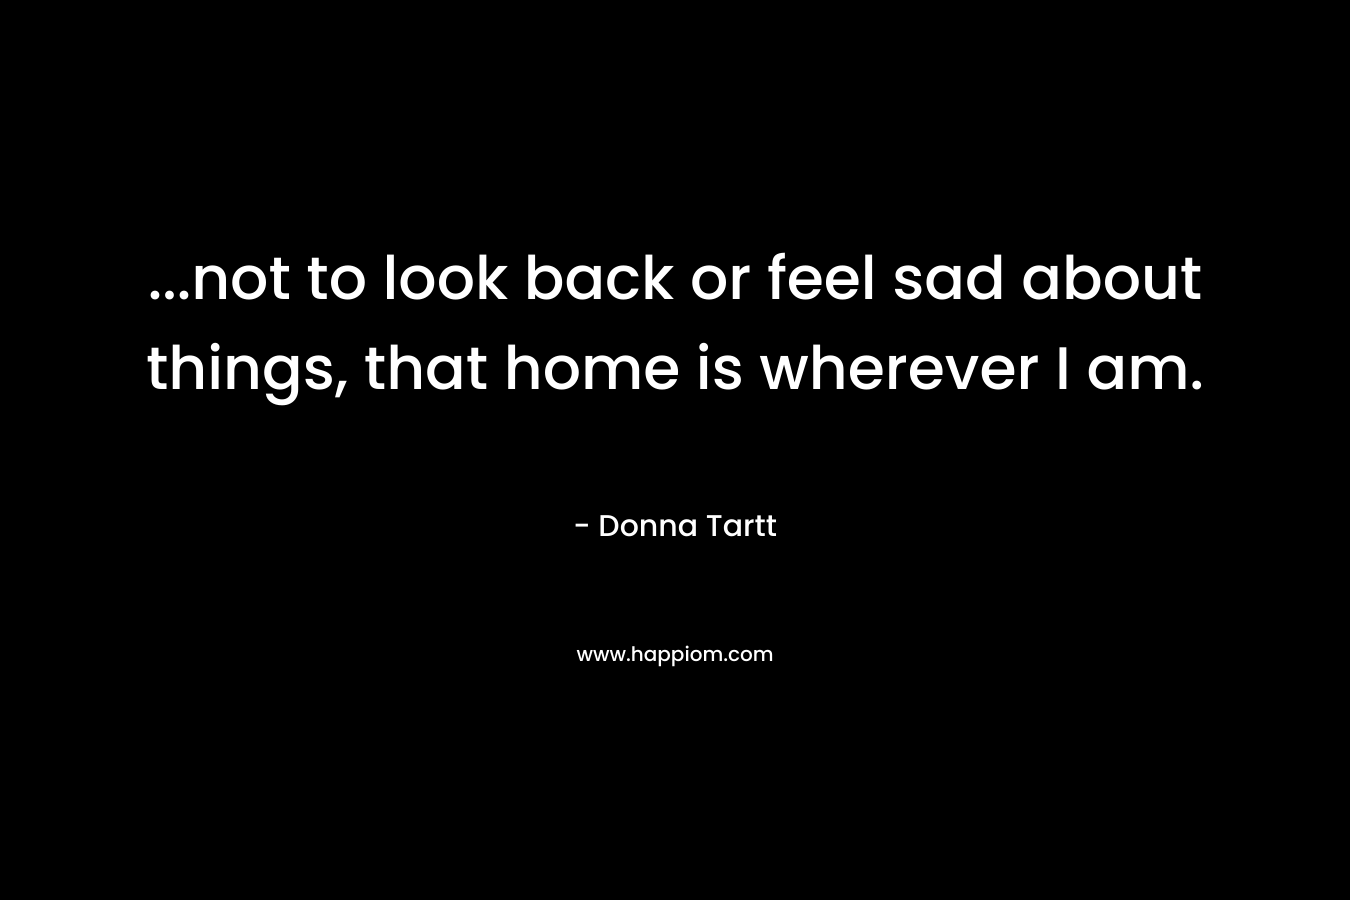 ...not to look back or feel sad about things, that home is wherever I am.